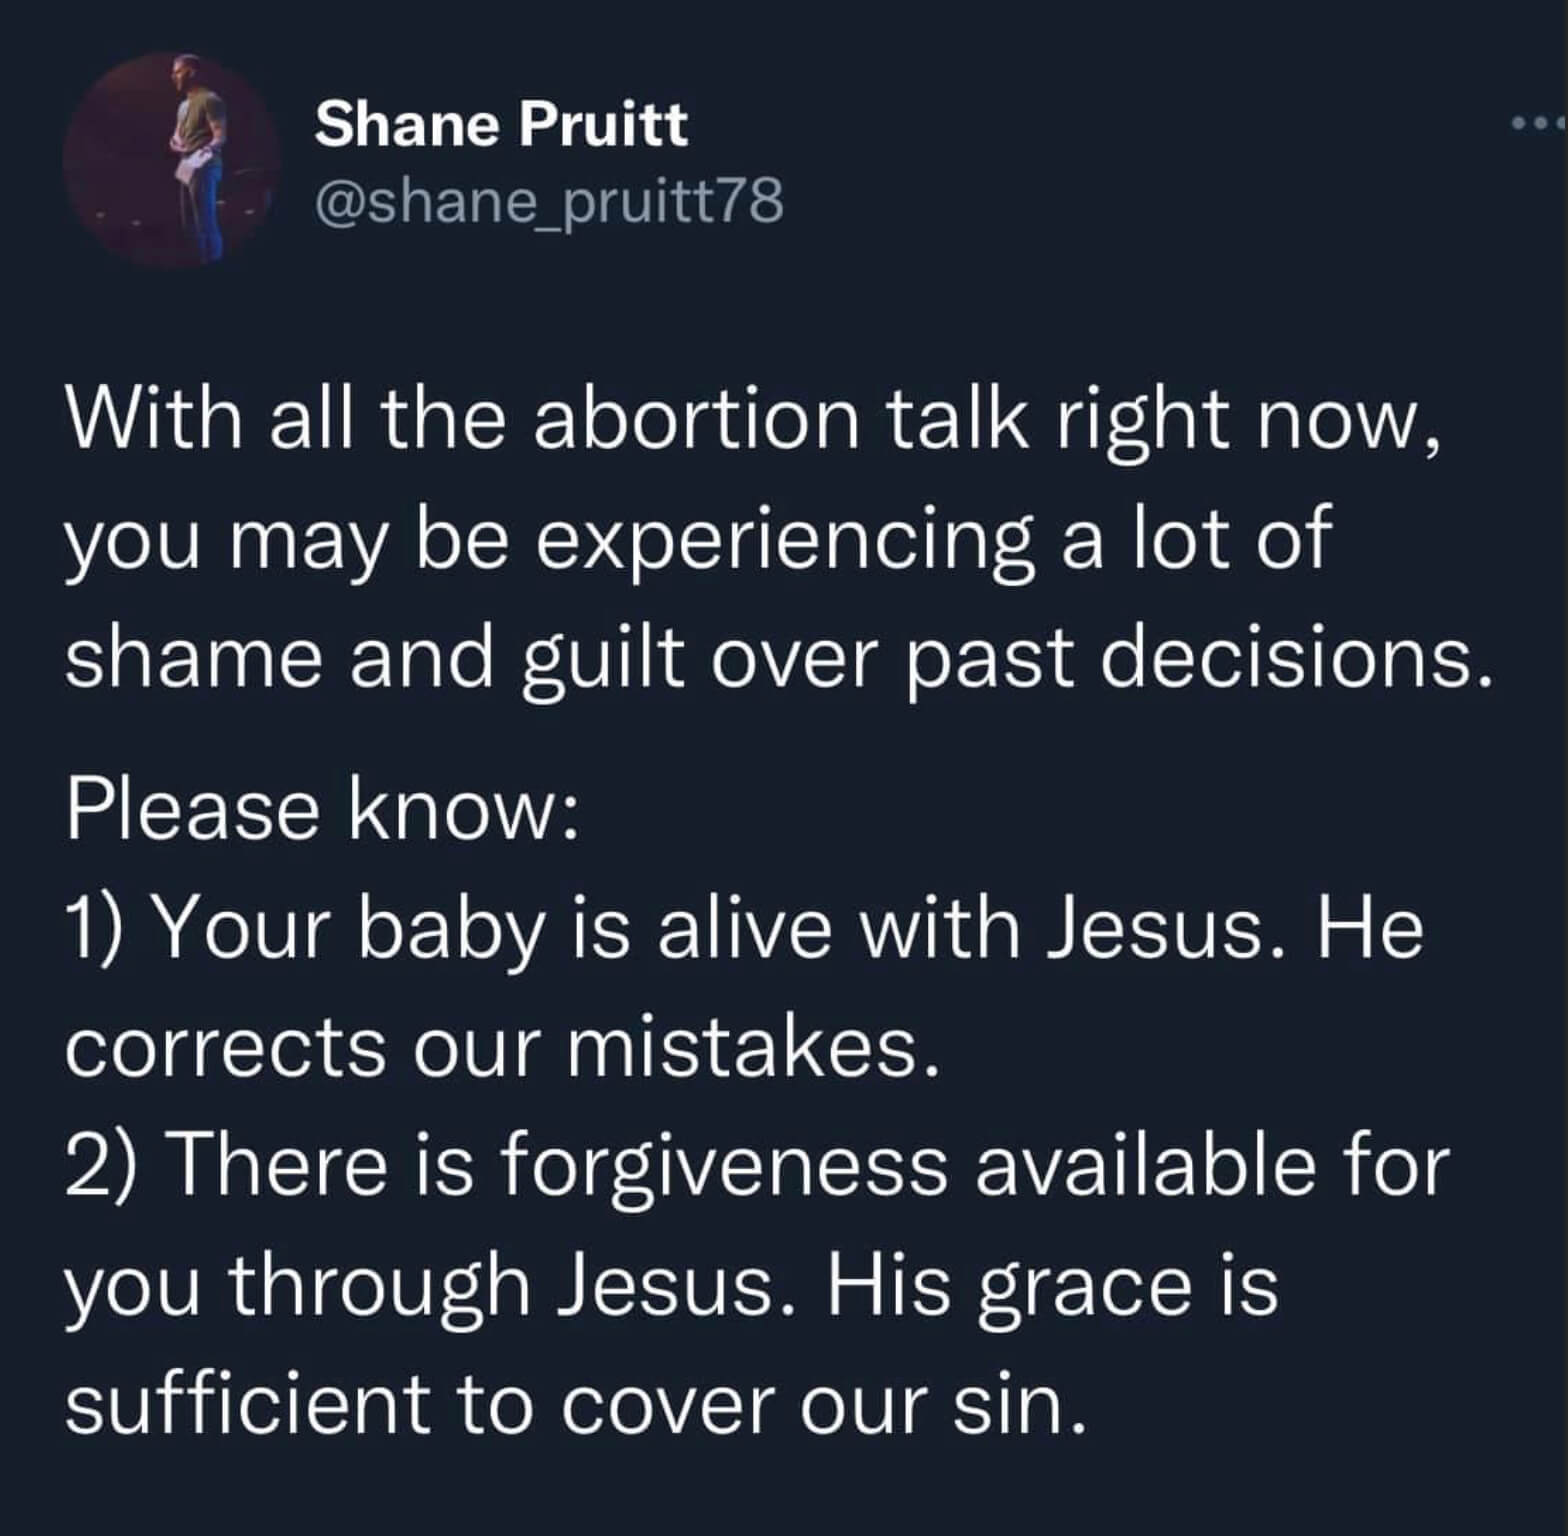 Compassion after abortion